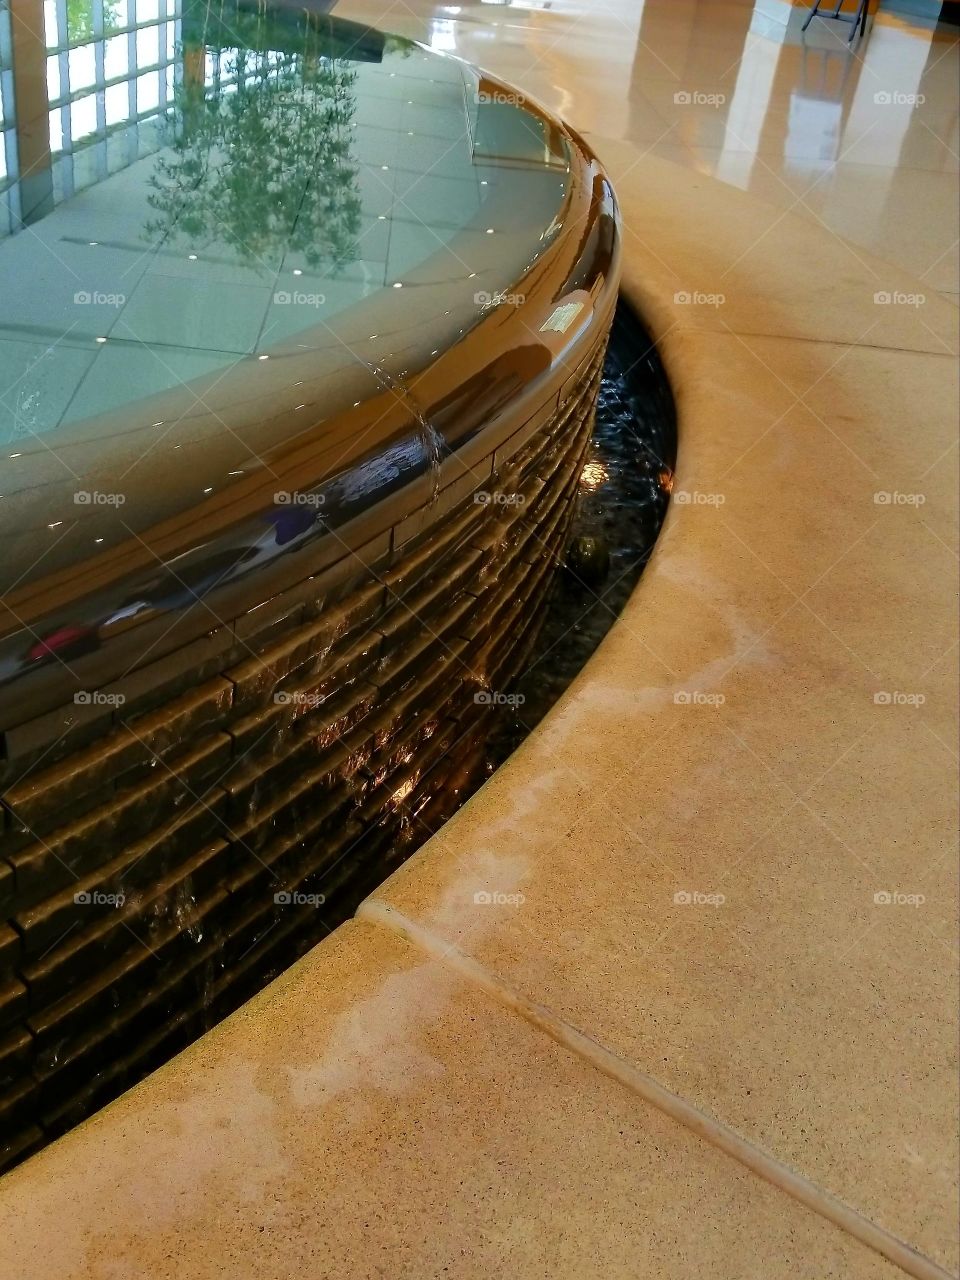 Fountain in the hospital entry